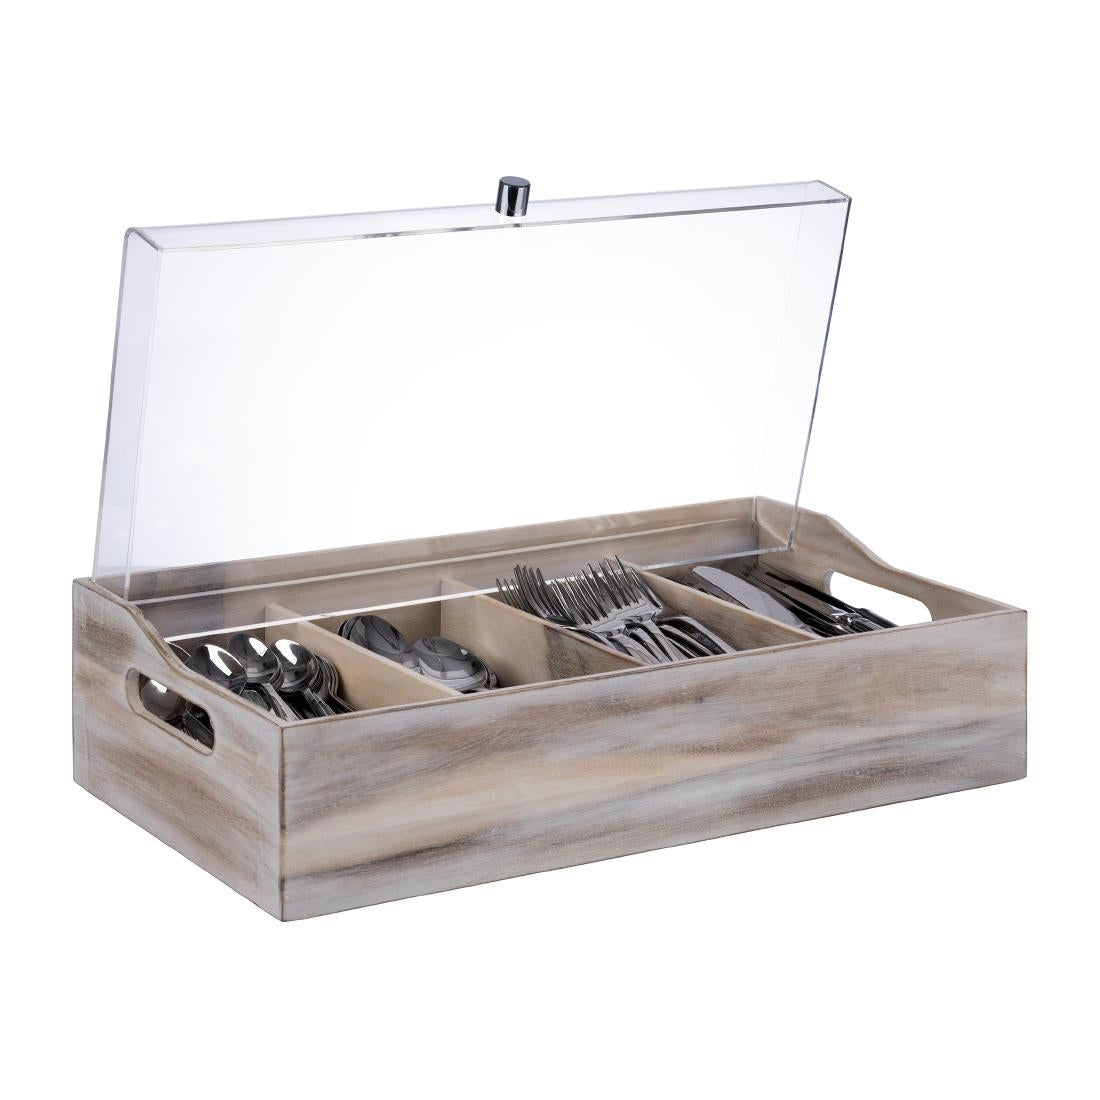 FT157 APS Cutlery Tray With Cover 510 x 280mm JD Catering Equipment Solutions Ltd